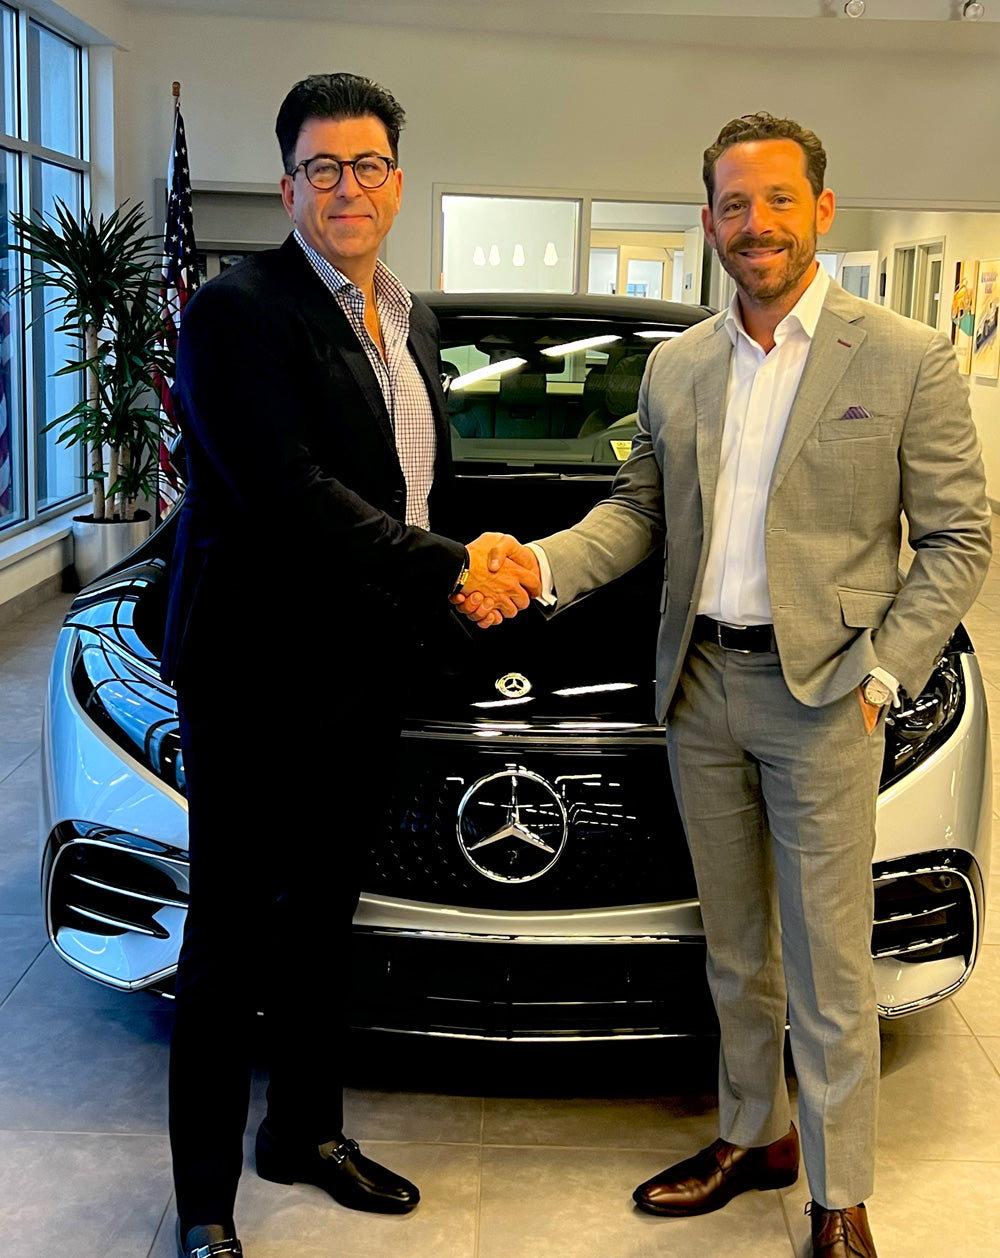 joseph albershtat and michael leikin in front of a mercedes-benz